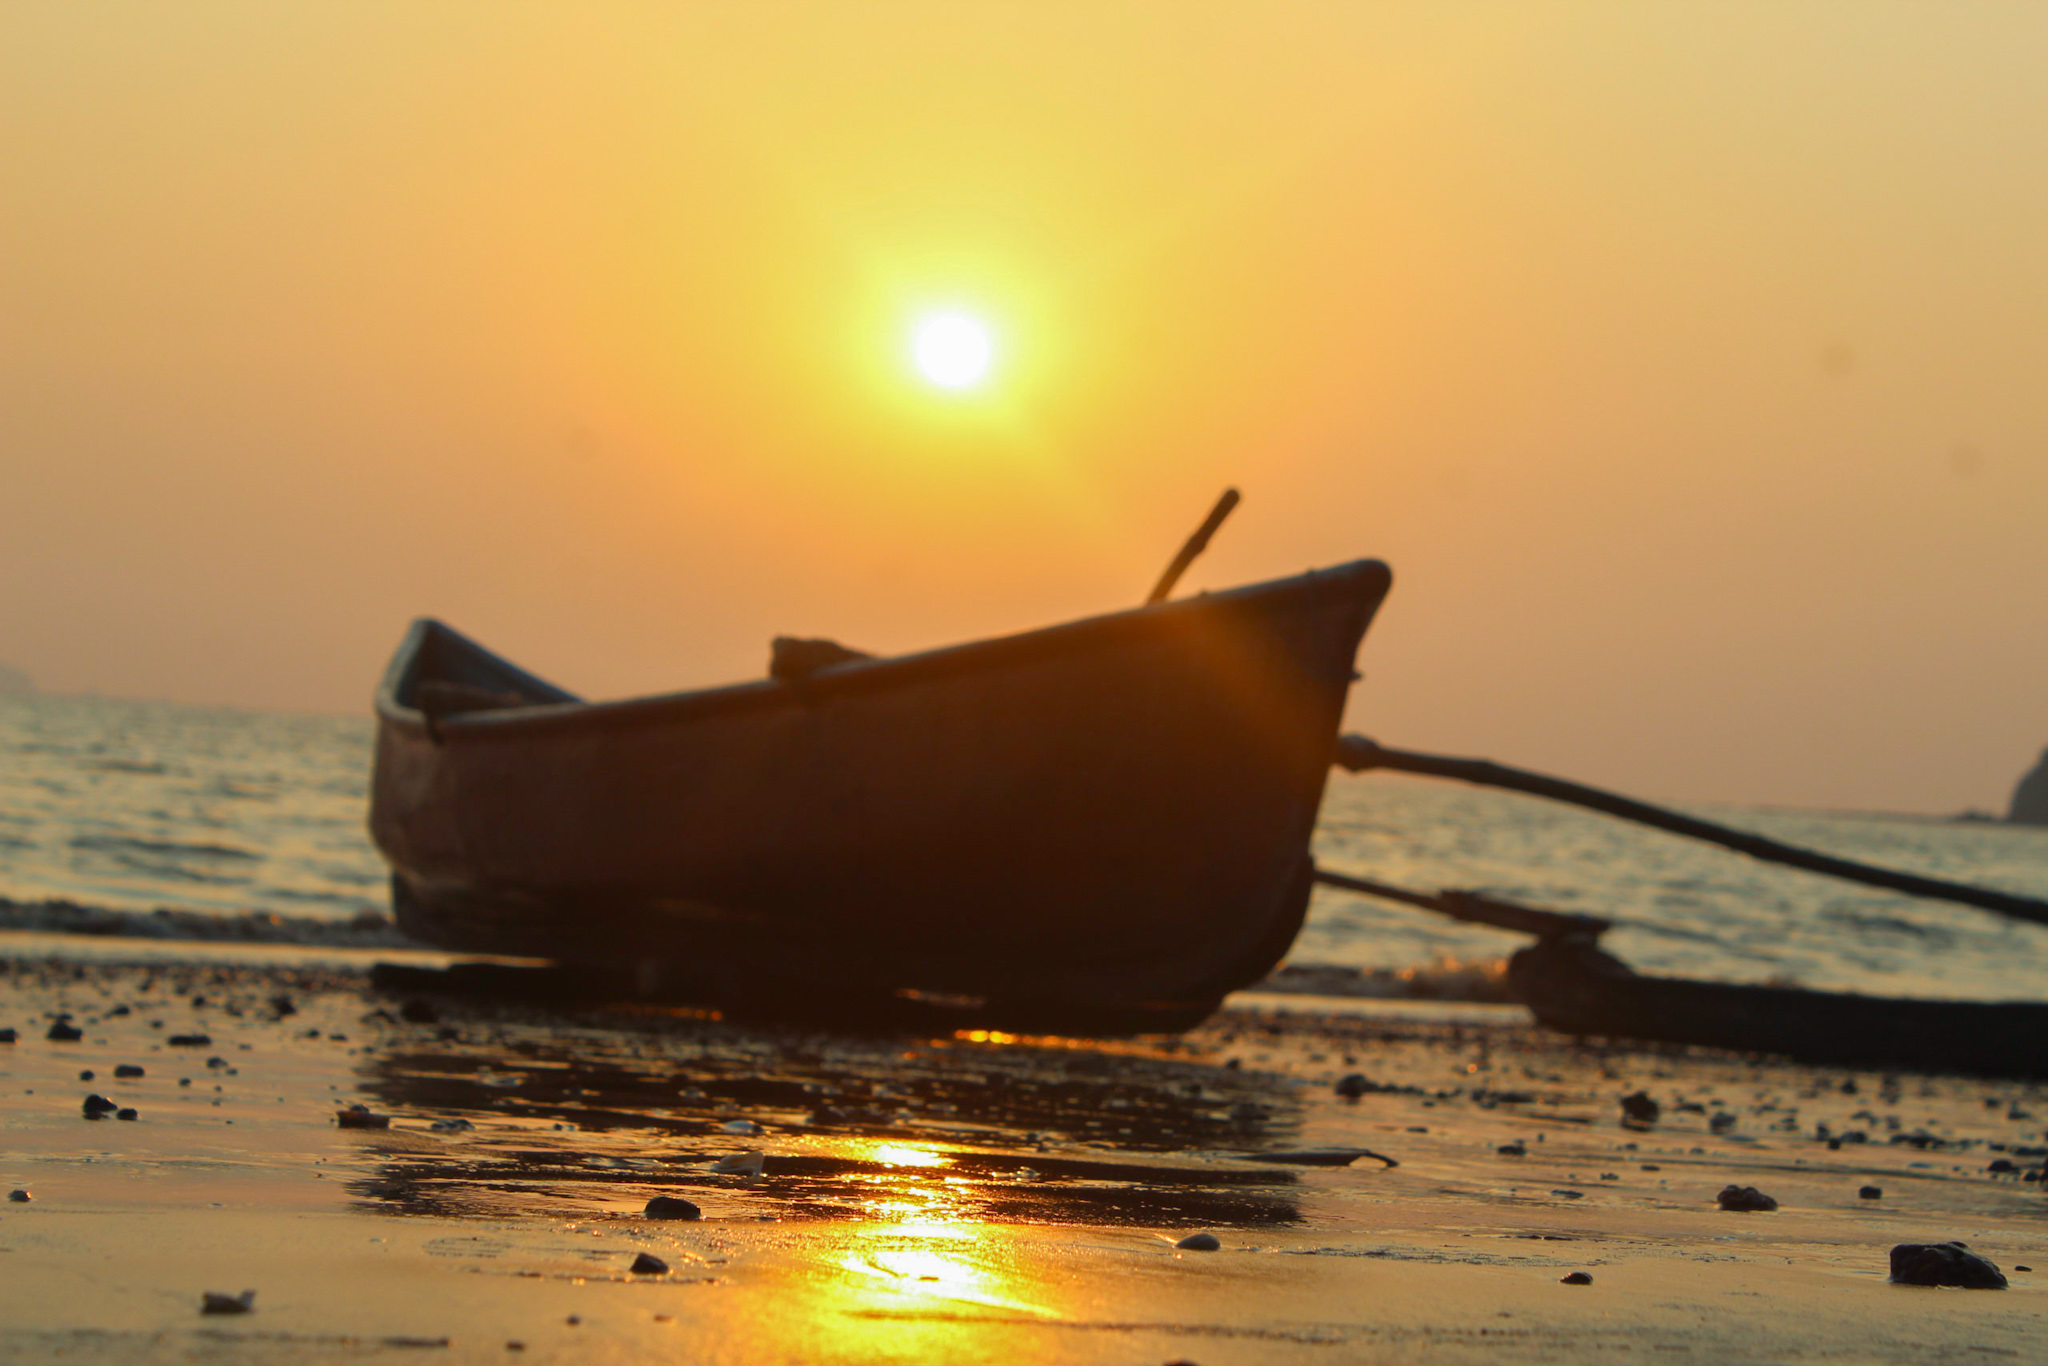 Sunset view of a boat on the beach